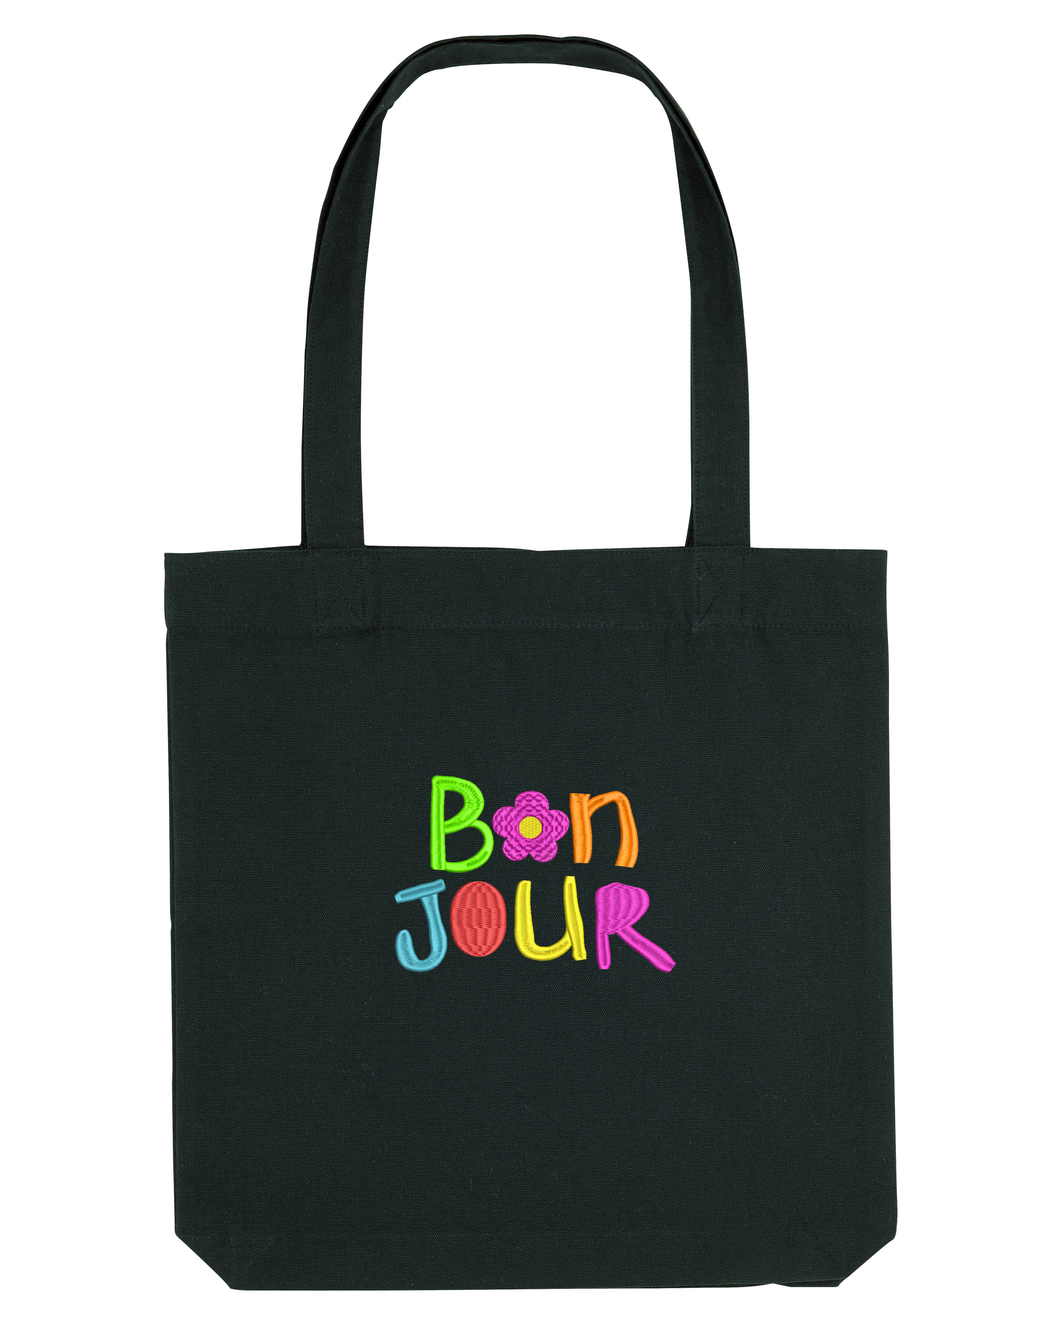 B🌸N JOUR Embroidered woven tote